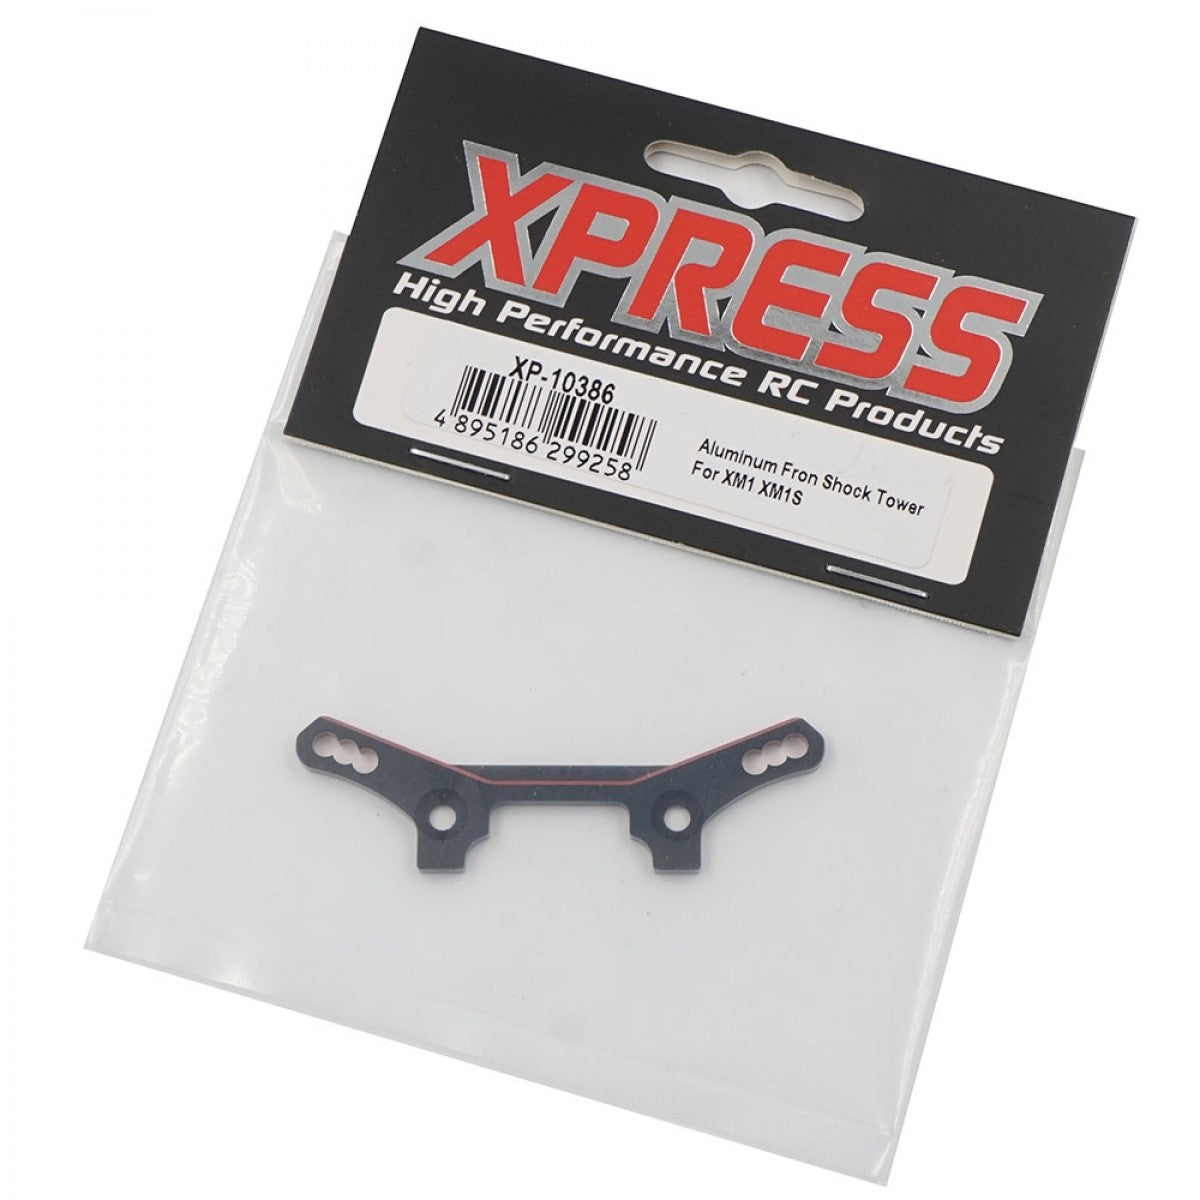 Xpress XP-10386 Aluminium 1mm Lowered Front Shock Tower for XM1 XM1S FM1S